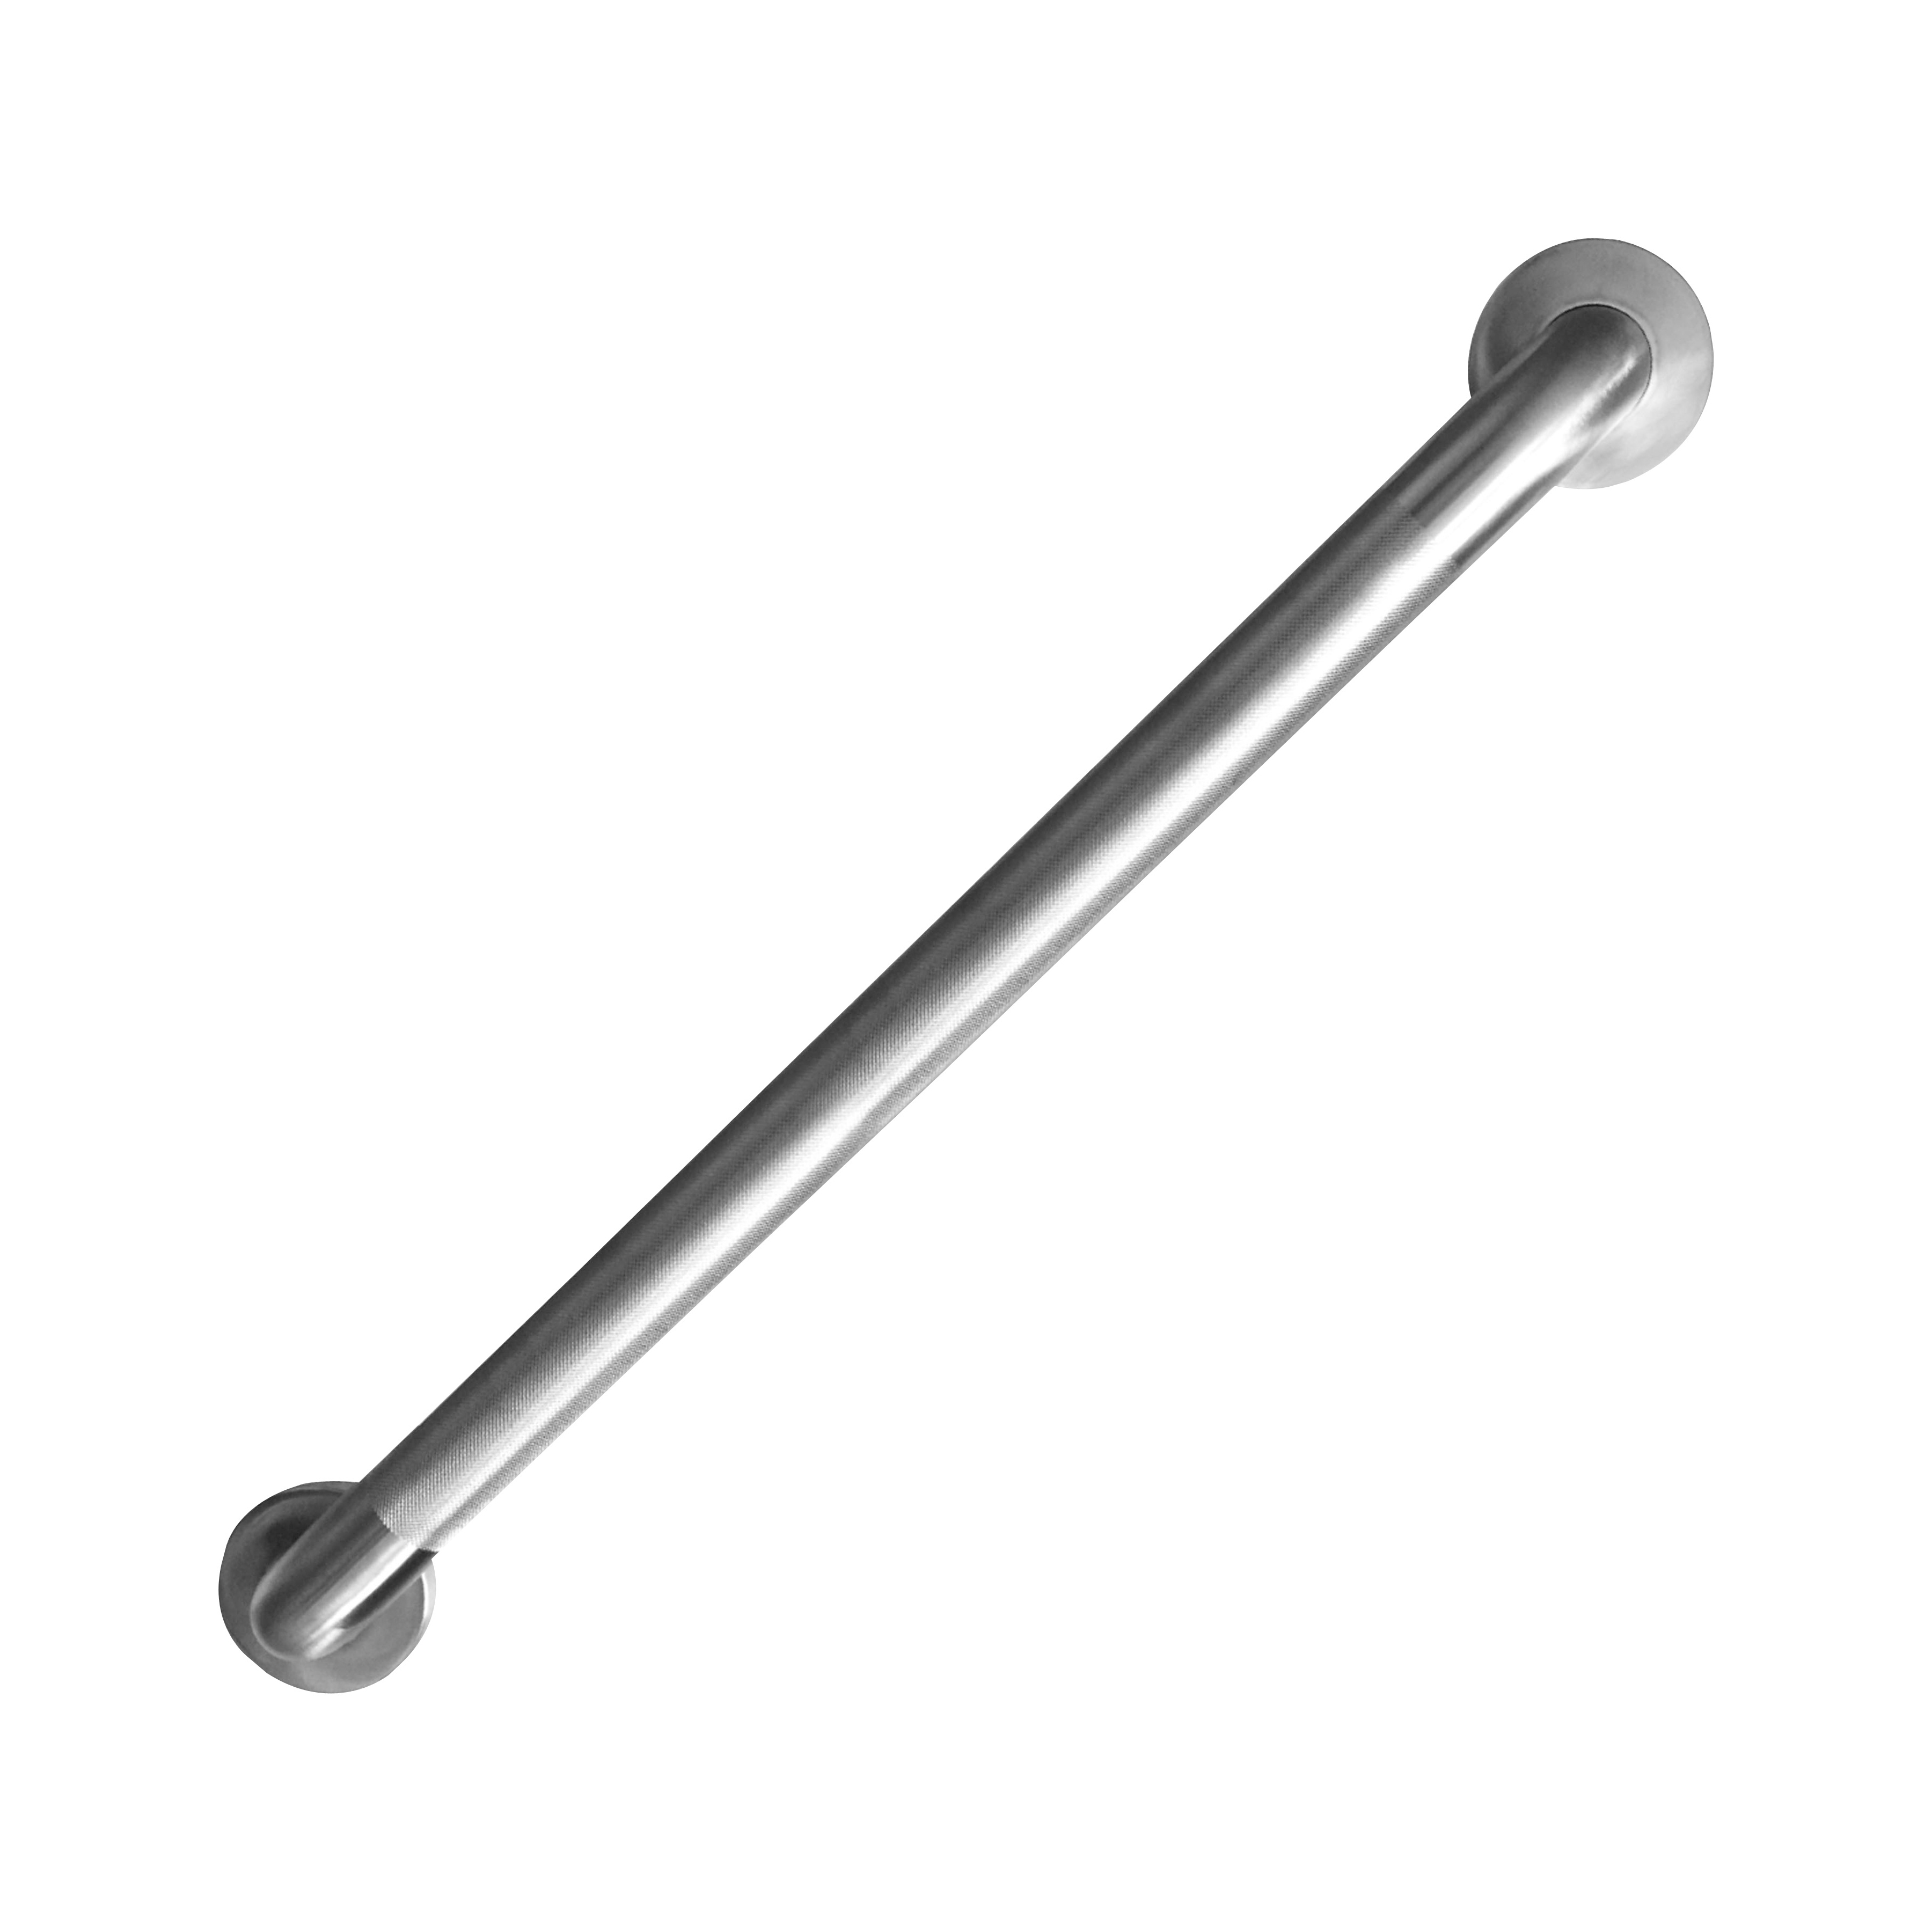 SG01-01&0424 Grab Bar, 24 in L Bar, Stainless Steel, Wall Mounted Mounting